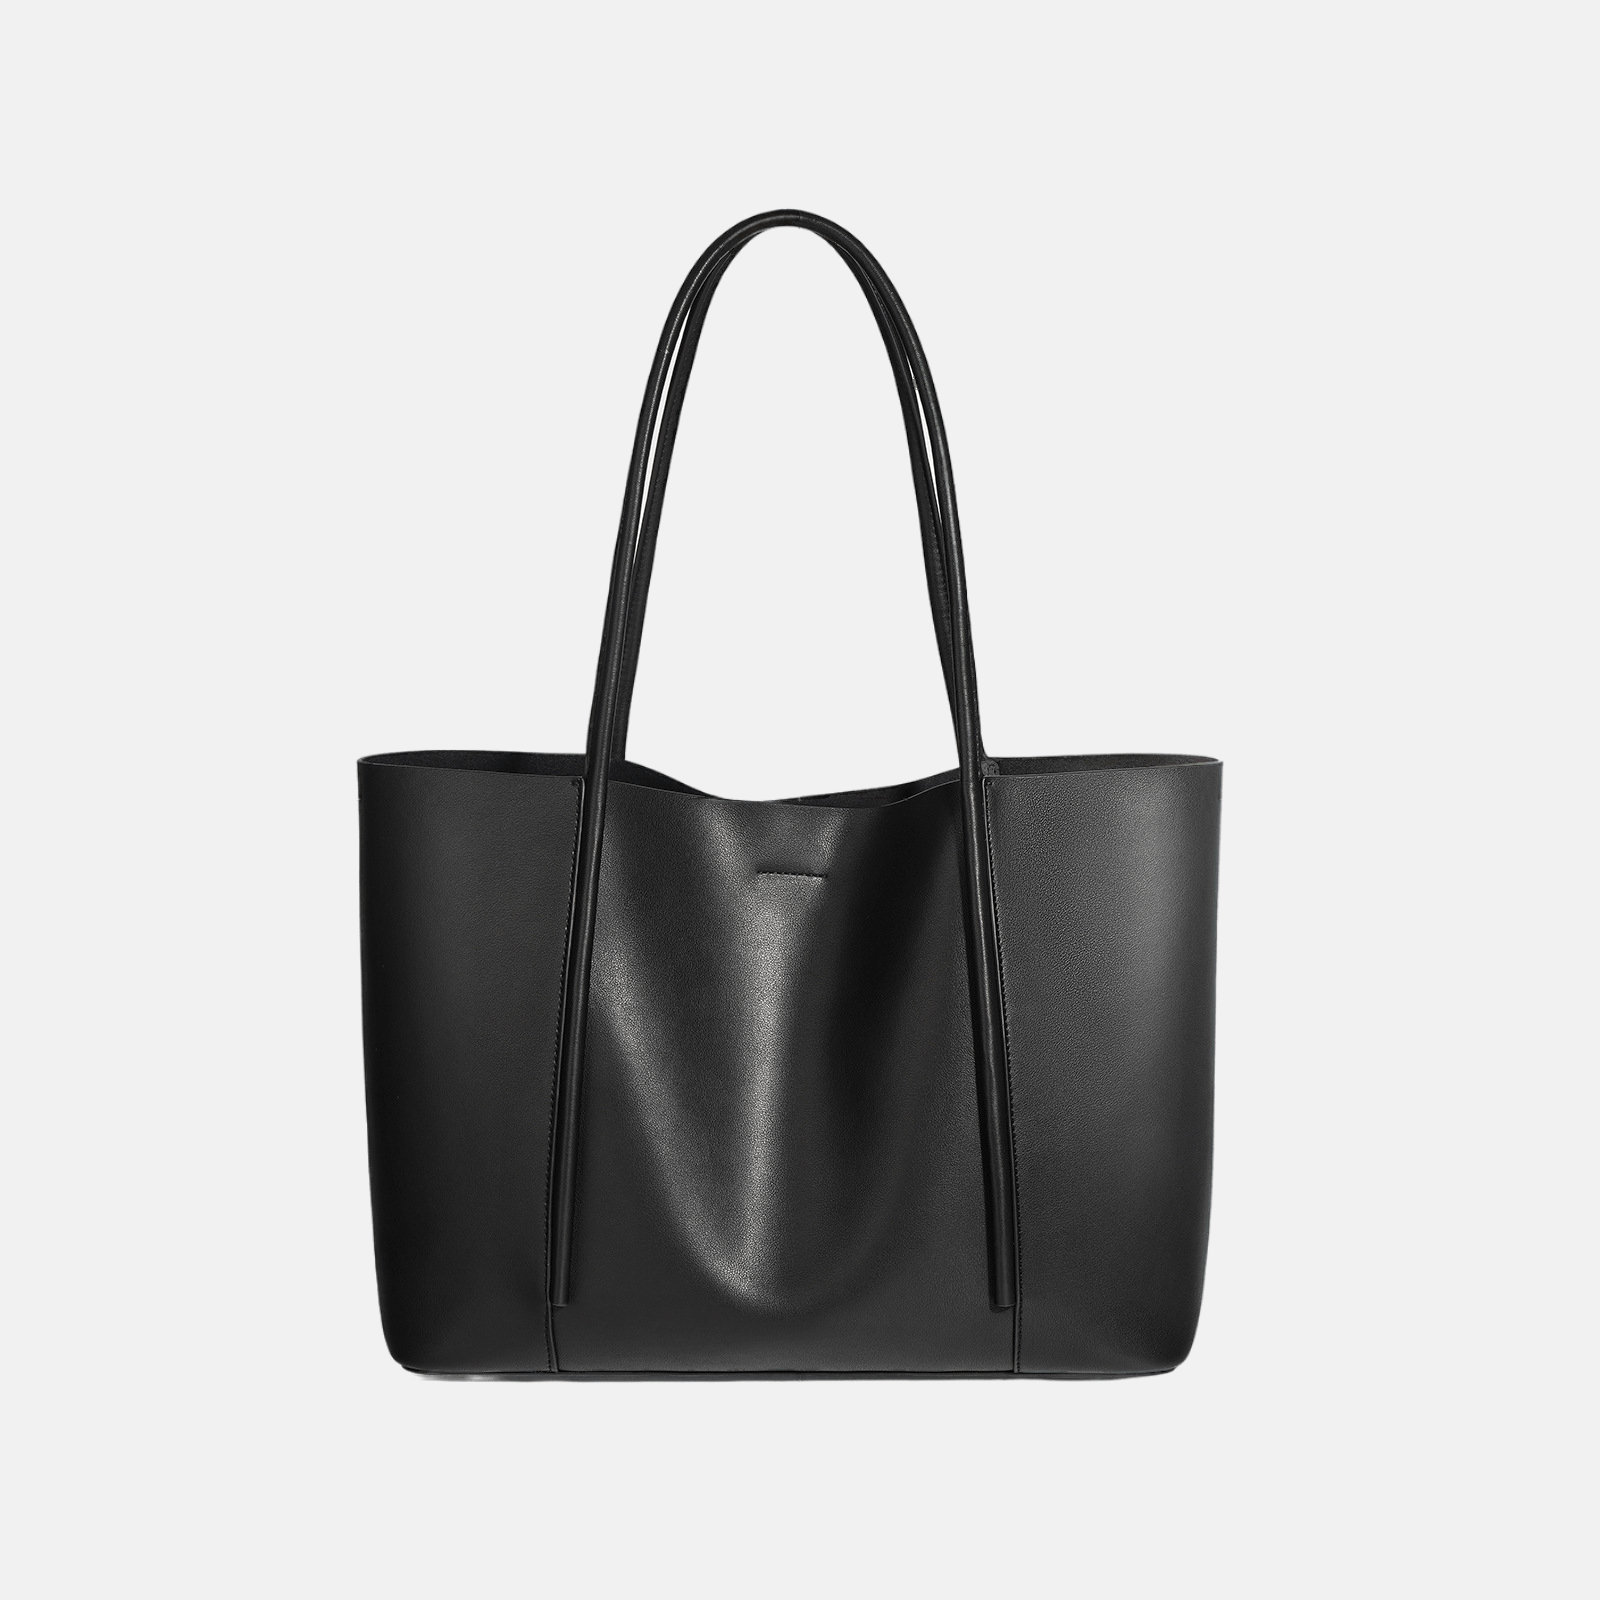 Women's Leather Tote Bag with Simple Style - ROMY TISA